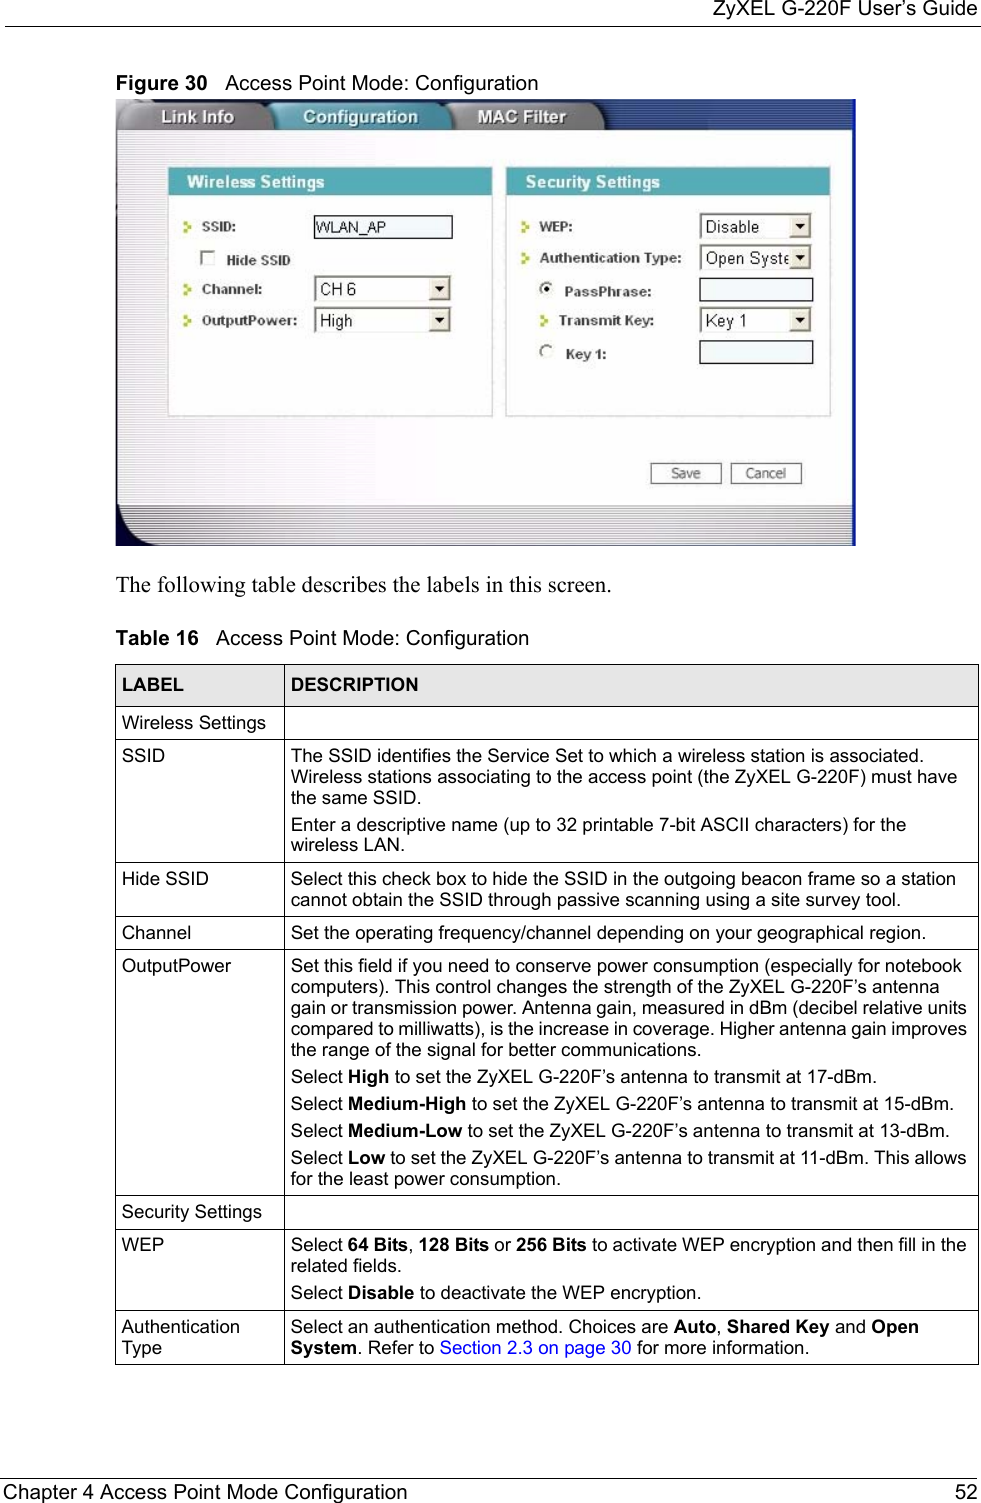 ZyXEL G-220F User’s GuideChapter 4 Access Point Mode Configuration 52Figure 30   Access Point Mode: Configuration The following table describes the labels in this screen. Table 16   Access Point Mode: Configuration LABEL DESCRIPTIONWireless SettingsSSID The SSID identifies the Service Set to which a wireless station is associated. Wireless stations associating to the access point (the ZyXEL G-220F) must have the same SSID.Enter a descriptive name (up to 32 printable 7-bit ASCII characters) for the wireless LAN.Hide SSID Select this check box to hide the SSID in the outgoing beacon frame so a station cannot obtain the SSID through passive scanning using a site survey tool.Channel Set the operating frequency/channel depending on your geographical region.OutputPower  Set this field if you need to conserve power consumption (especially for notebook computers). This control changes the strength of the ZyXEL G-220F’s antenna gain or transmission power. Antenna gain, measured in dBm (decibel relative units compared to milliwatts), is the increase in coverage. Higher antenna gain improves the range of the signal for better communications.Select High to set the ZyXEL G-220F’s antenna to transmit at 17-dBm.Select Medium-High to set the ZyXEL G-220F’s antenna to transmit at 15-dBm.Select Medium-Low to set the ZyXEL G-220F’s antenna to transmit at 13-dBm.Select Low to set the ZyXEL G-220F’s antenna to transmit at 11-dBm. This allows for the least power consumption.Security SettingsWEP Select 64 Bits, 128 Bits or 256 Bits to activate WEP encryption and then fill in the related fields. Select Disable to deactivate the WEP encryption.Authentication TypeSelect an authentication method. Choices are Auto, Shared Key and Open System. Refer to Section 2.3 on page 30 for more information.